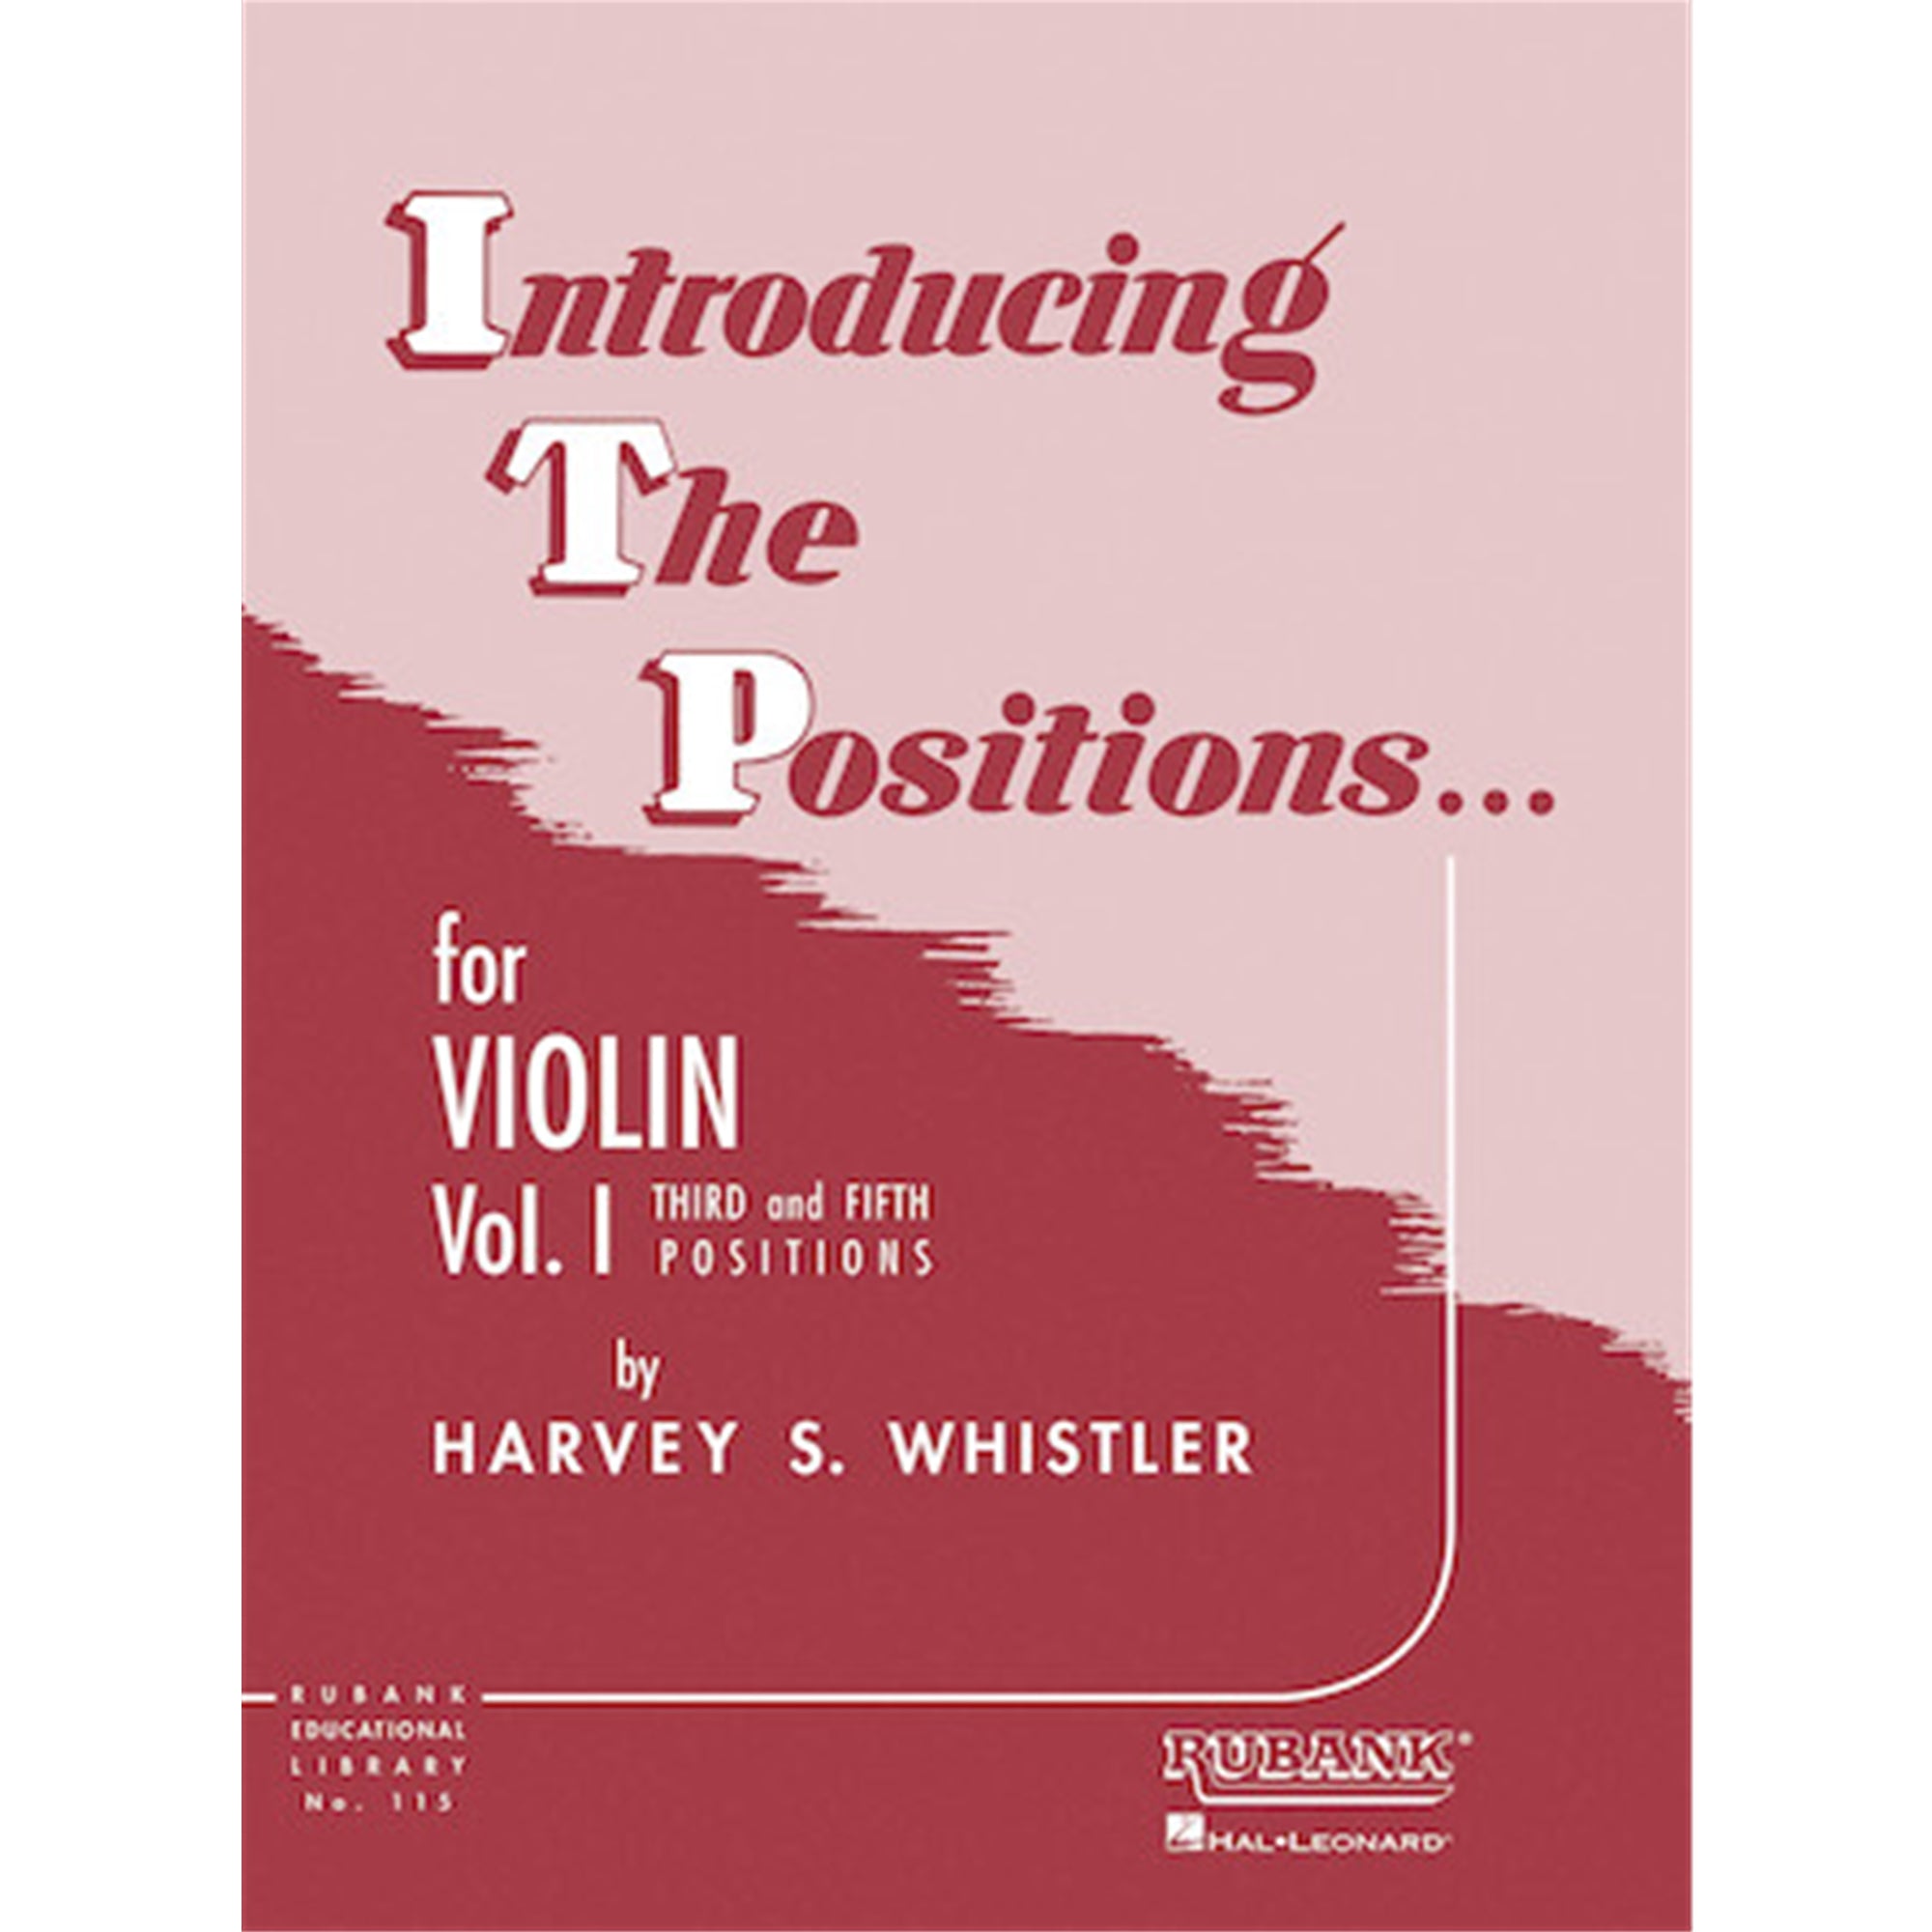 RUBANK 4472550 Introducing the Positions for Violin Vol. 1